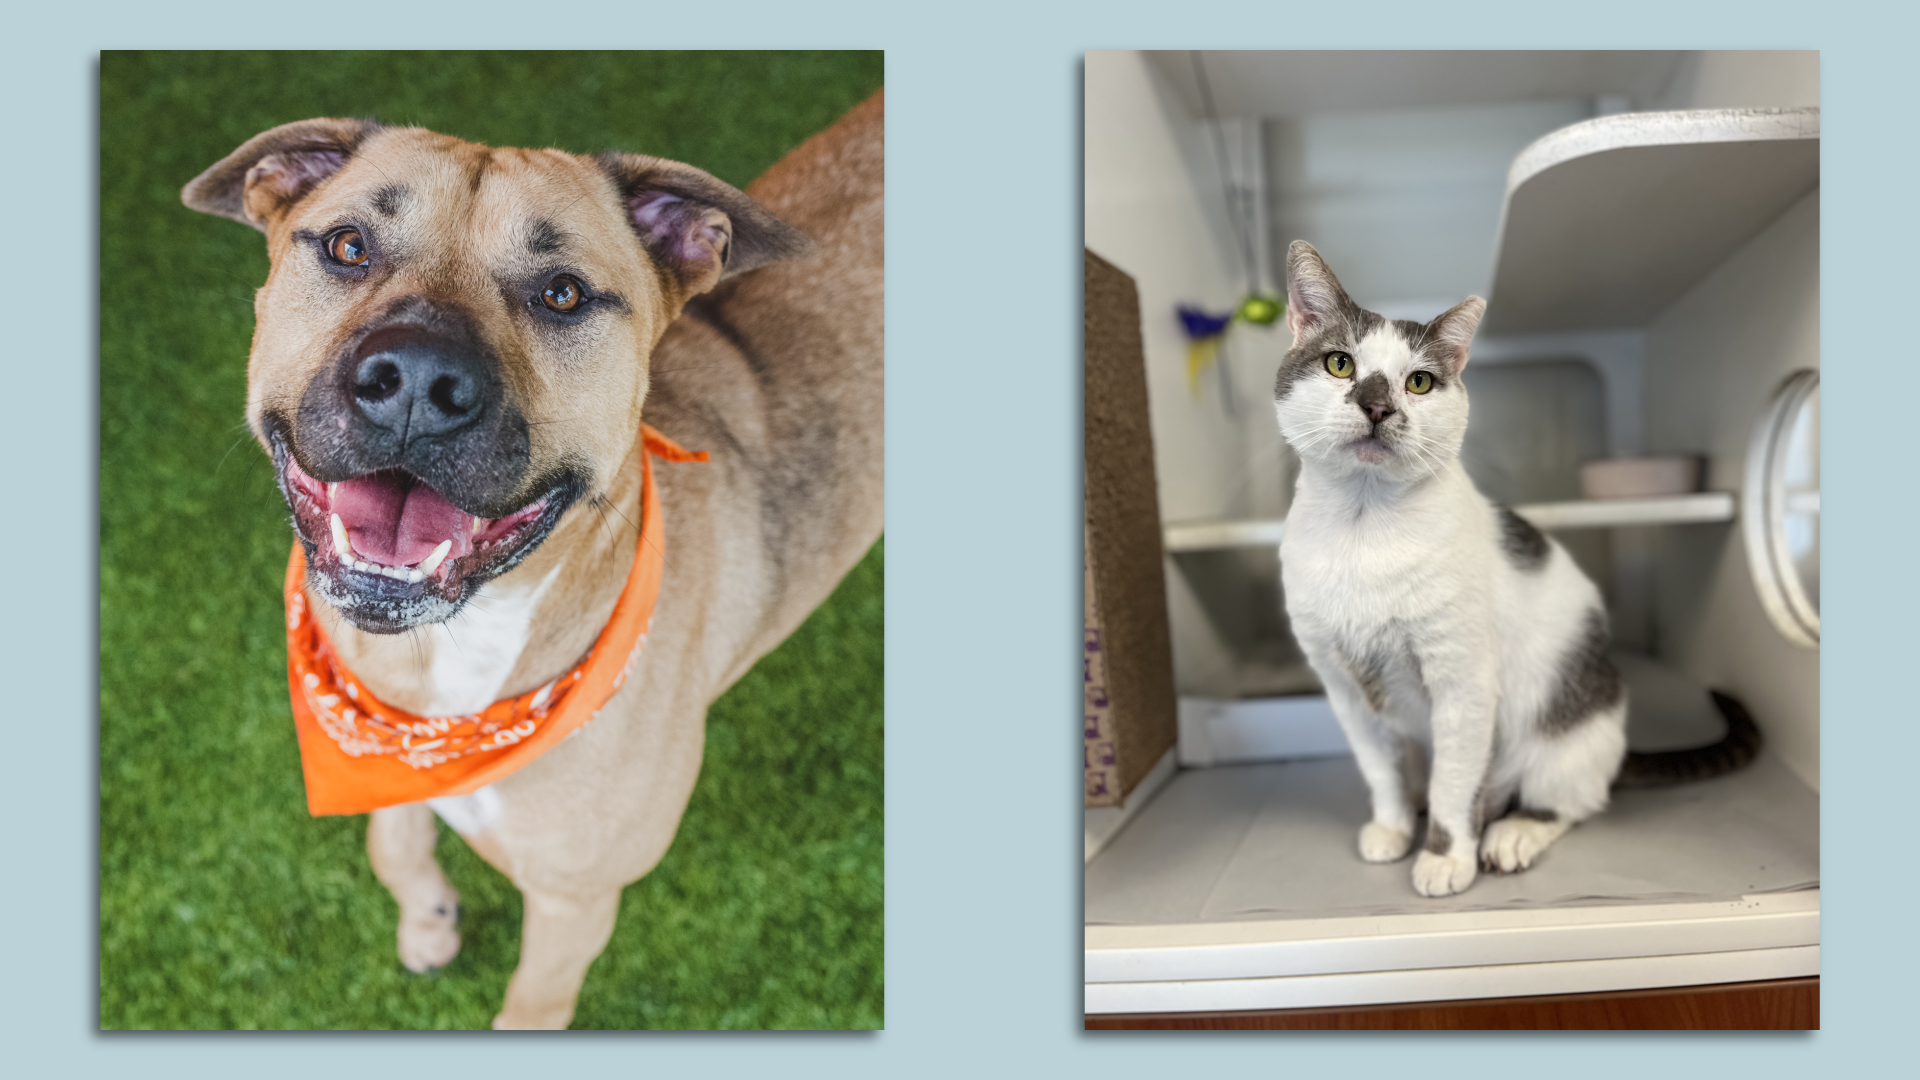 A side by side photo of Patches the dog and Lucky the cat, who are living at Miami-Dade Animal Services and in need of adoption.